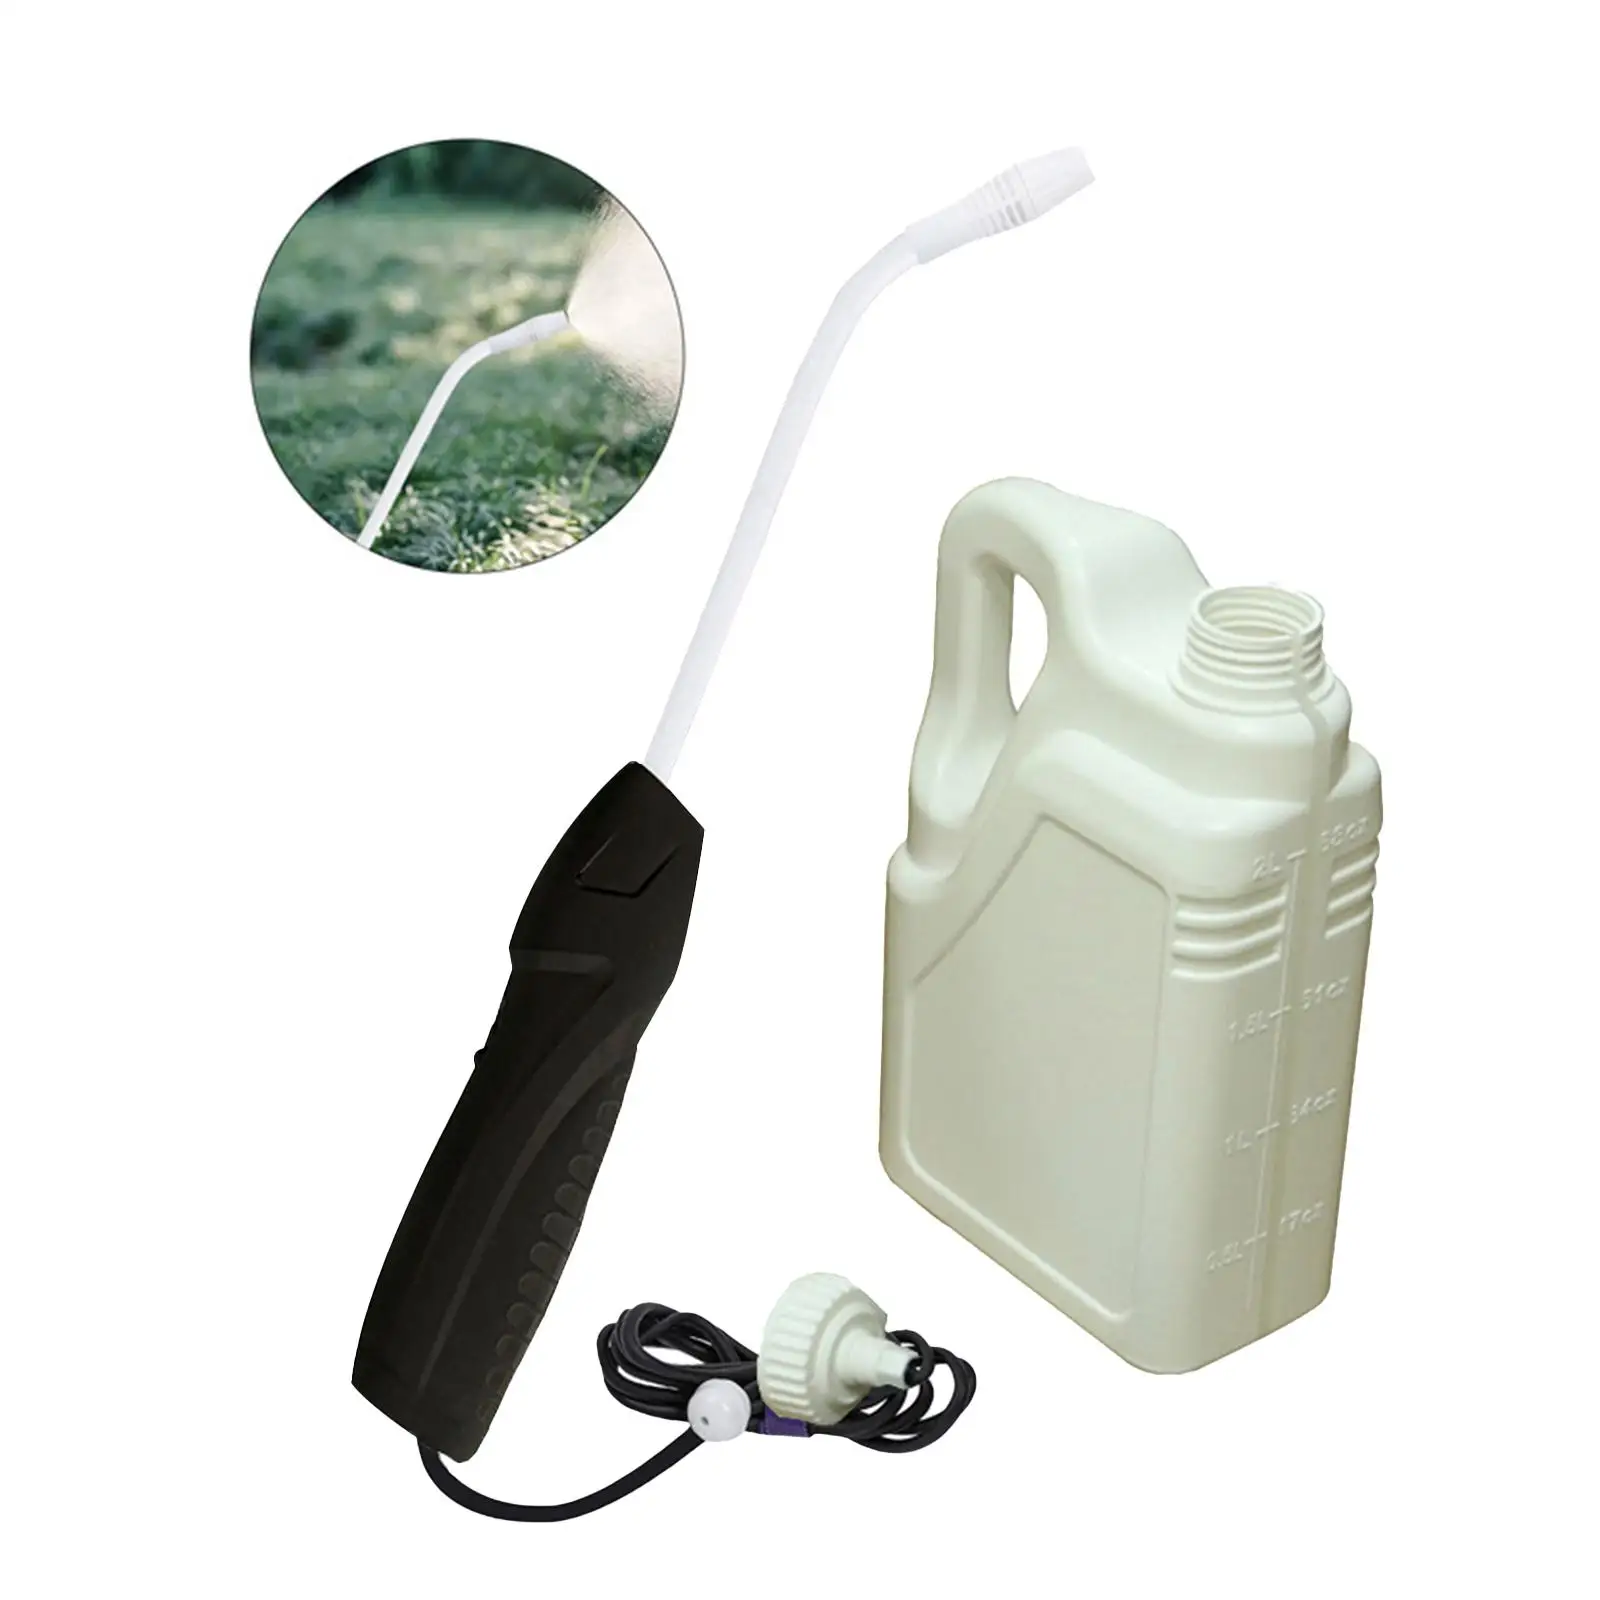 Rechargeable Spray Mister Watering Spray for Pet Bathing Yard Car Washing